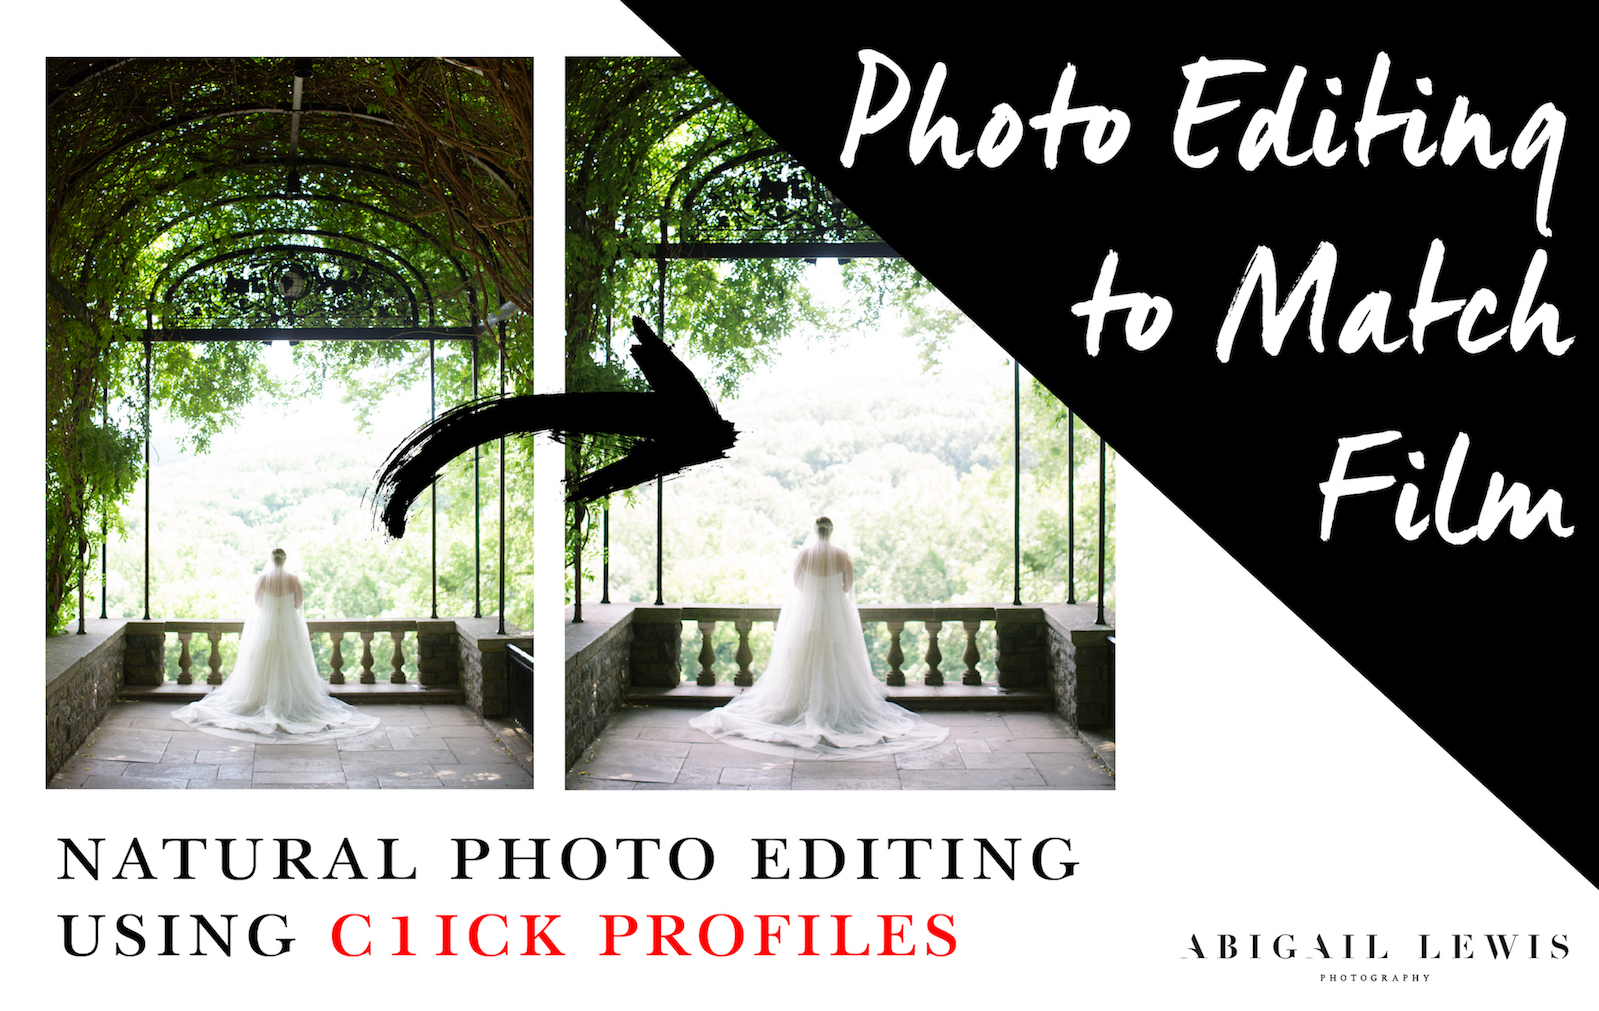 photo editing to match film | natural photo editing using c1ick color profiles